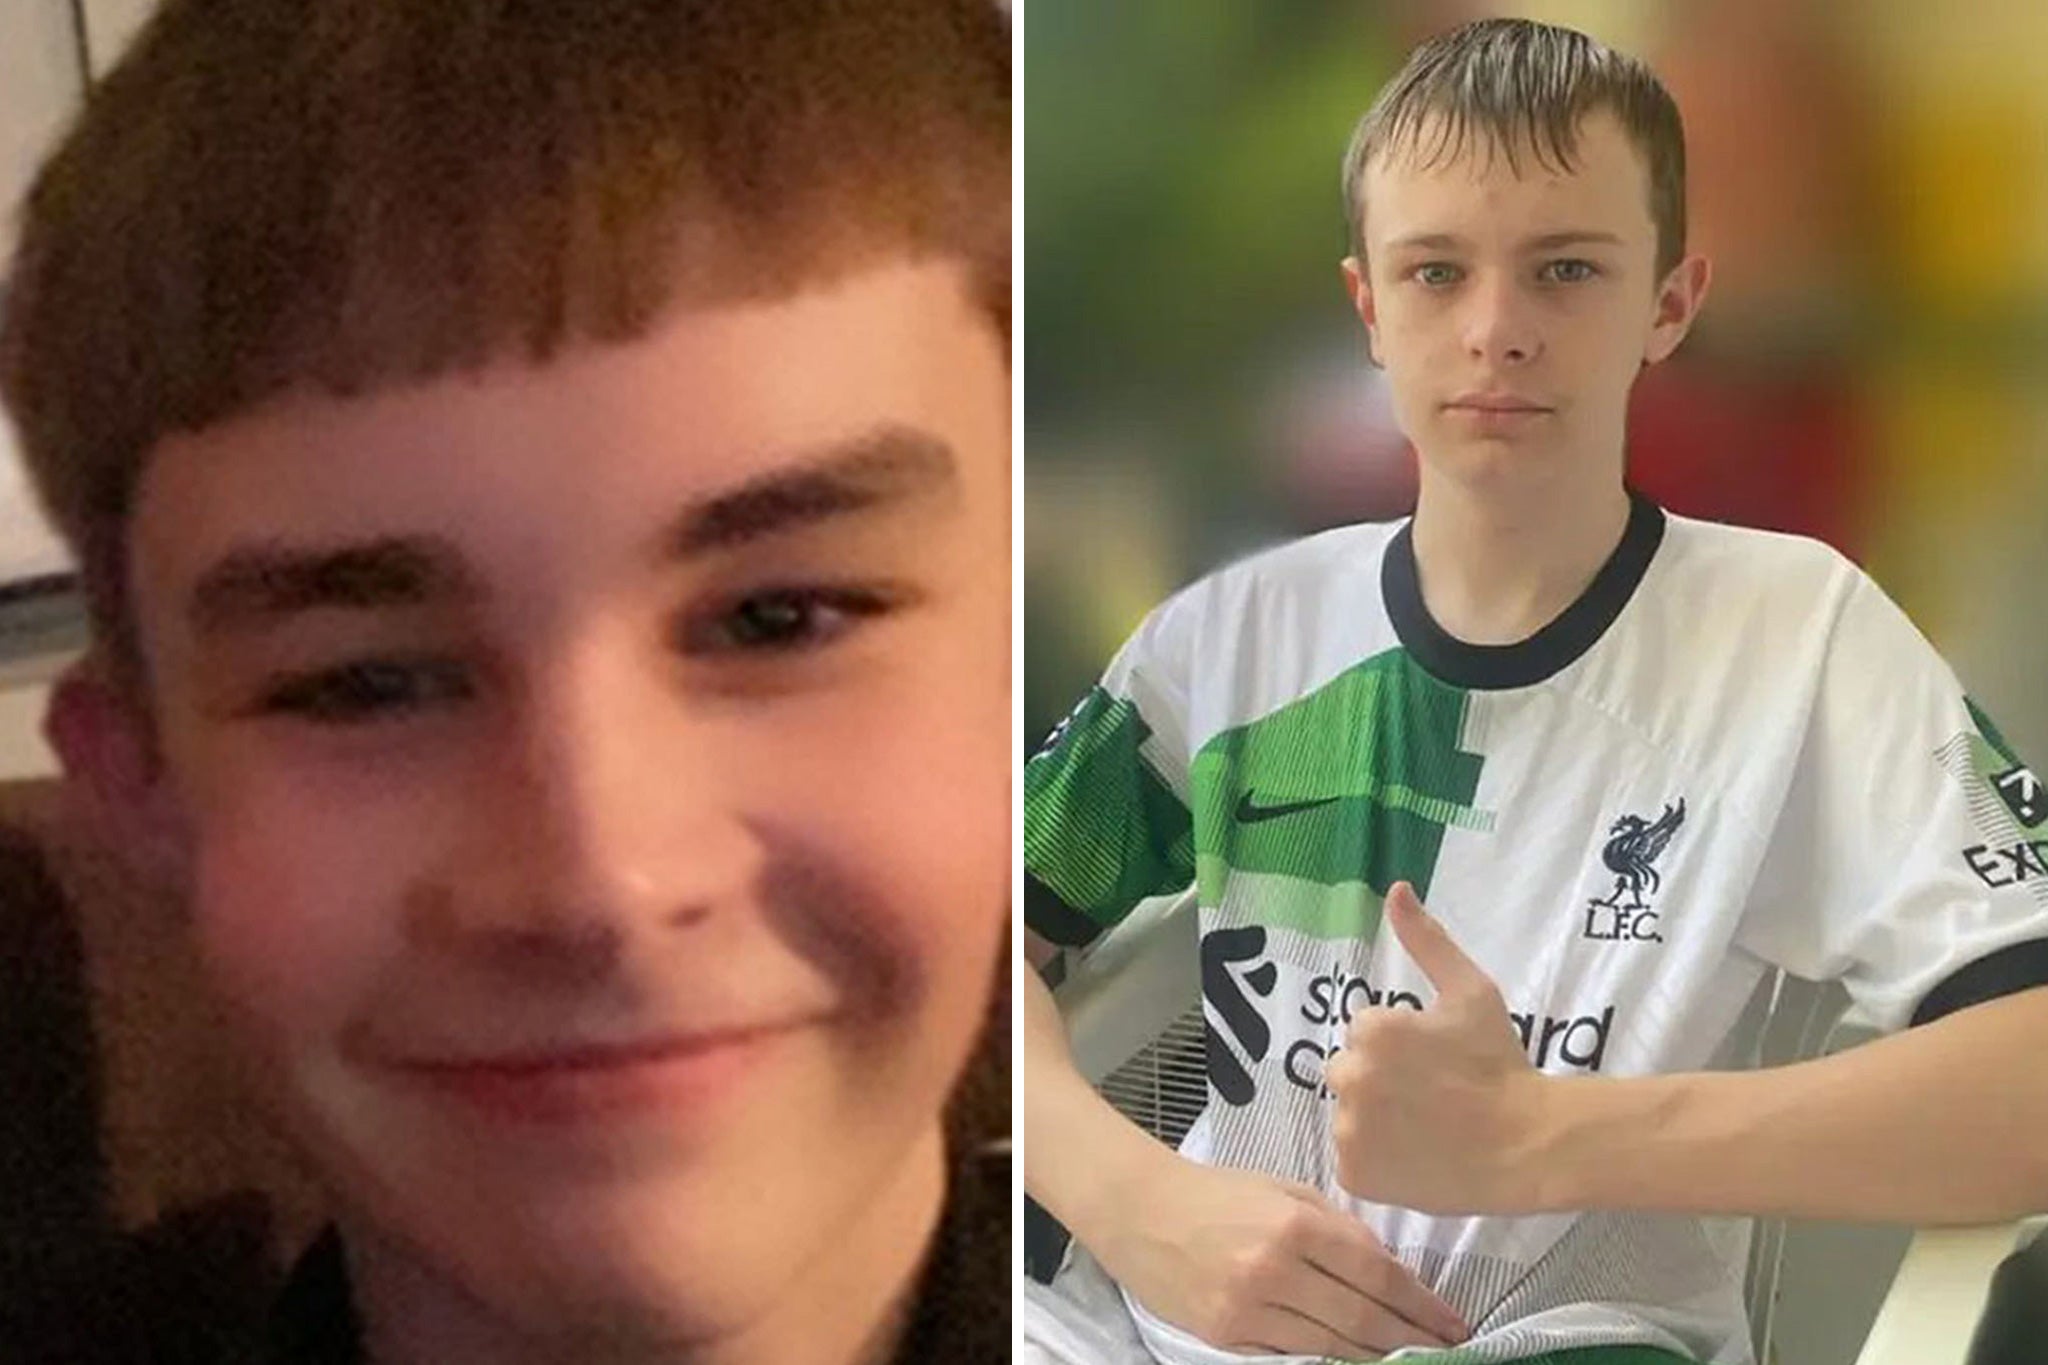 16-year-old Max Dixon and 15-year-old Mason Rist died after a stabbing attack